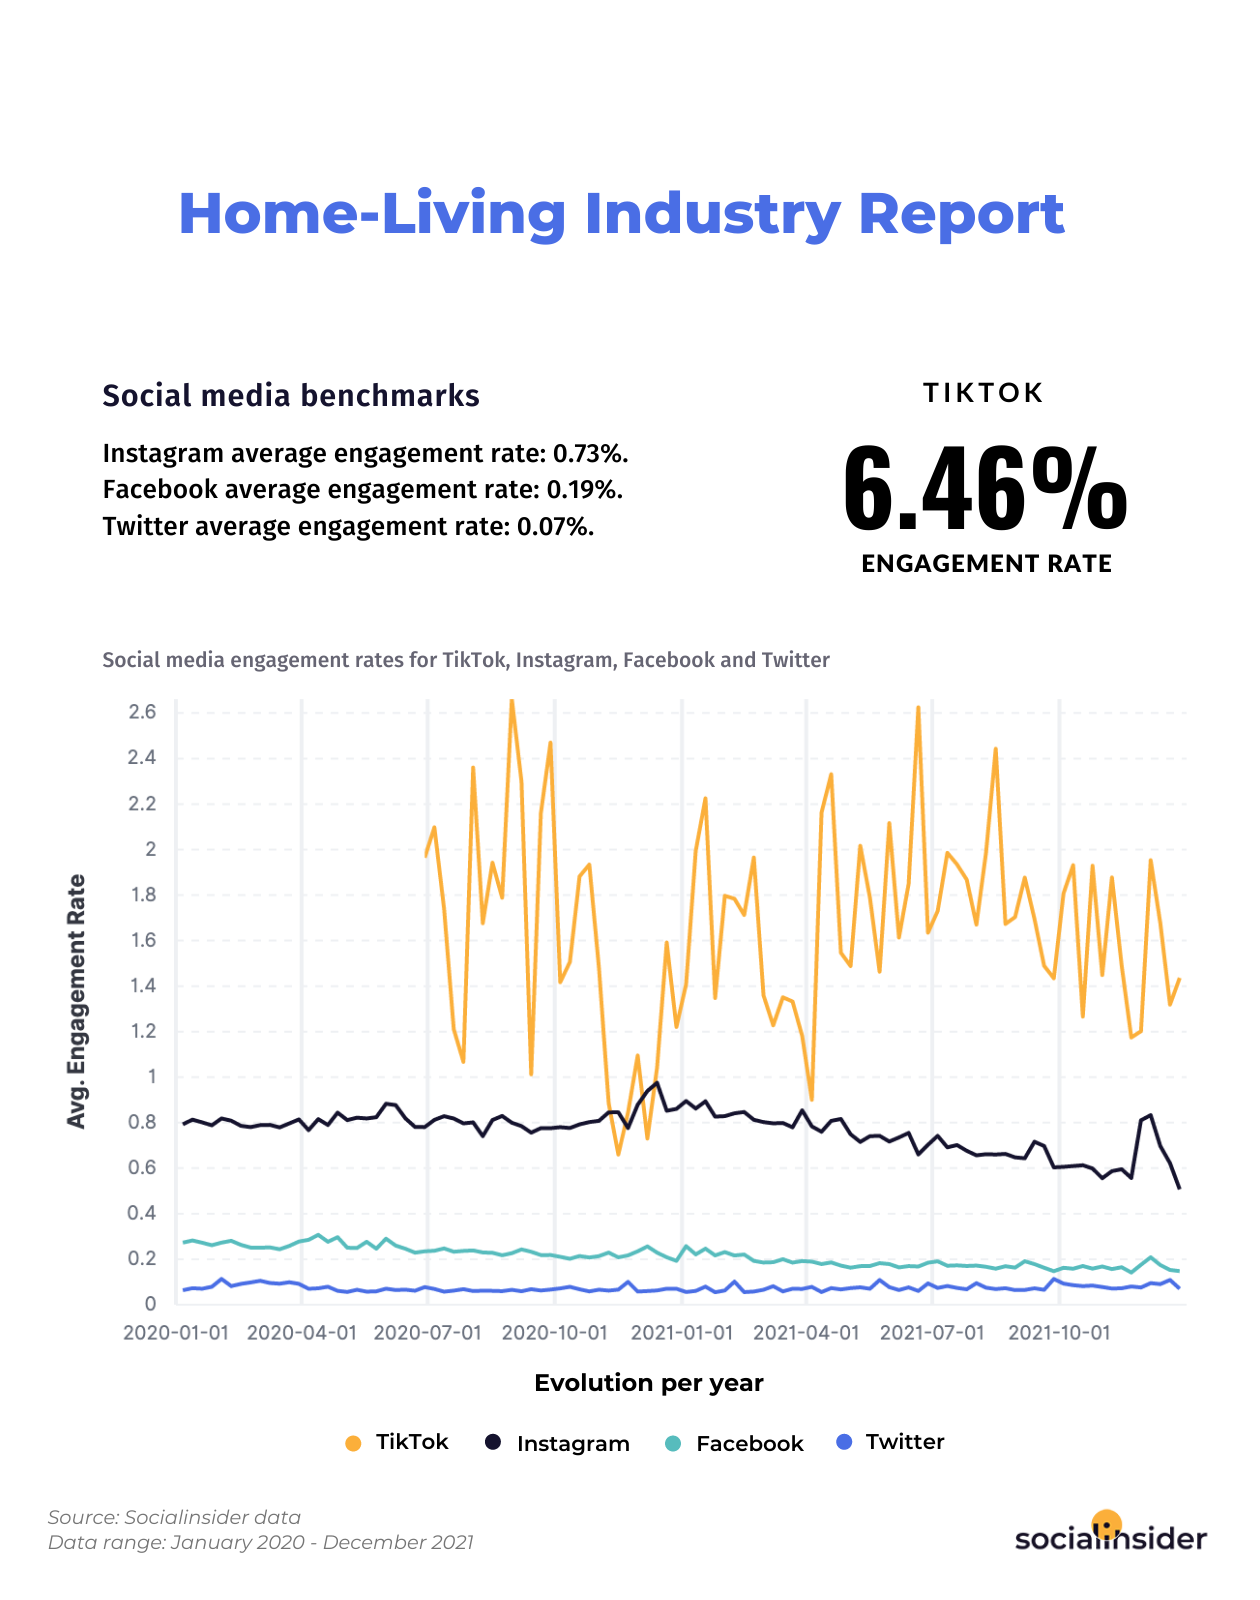 Engagement rates for the home-living industry for 2022